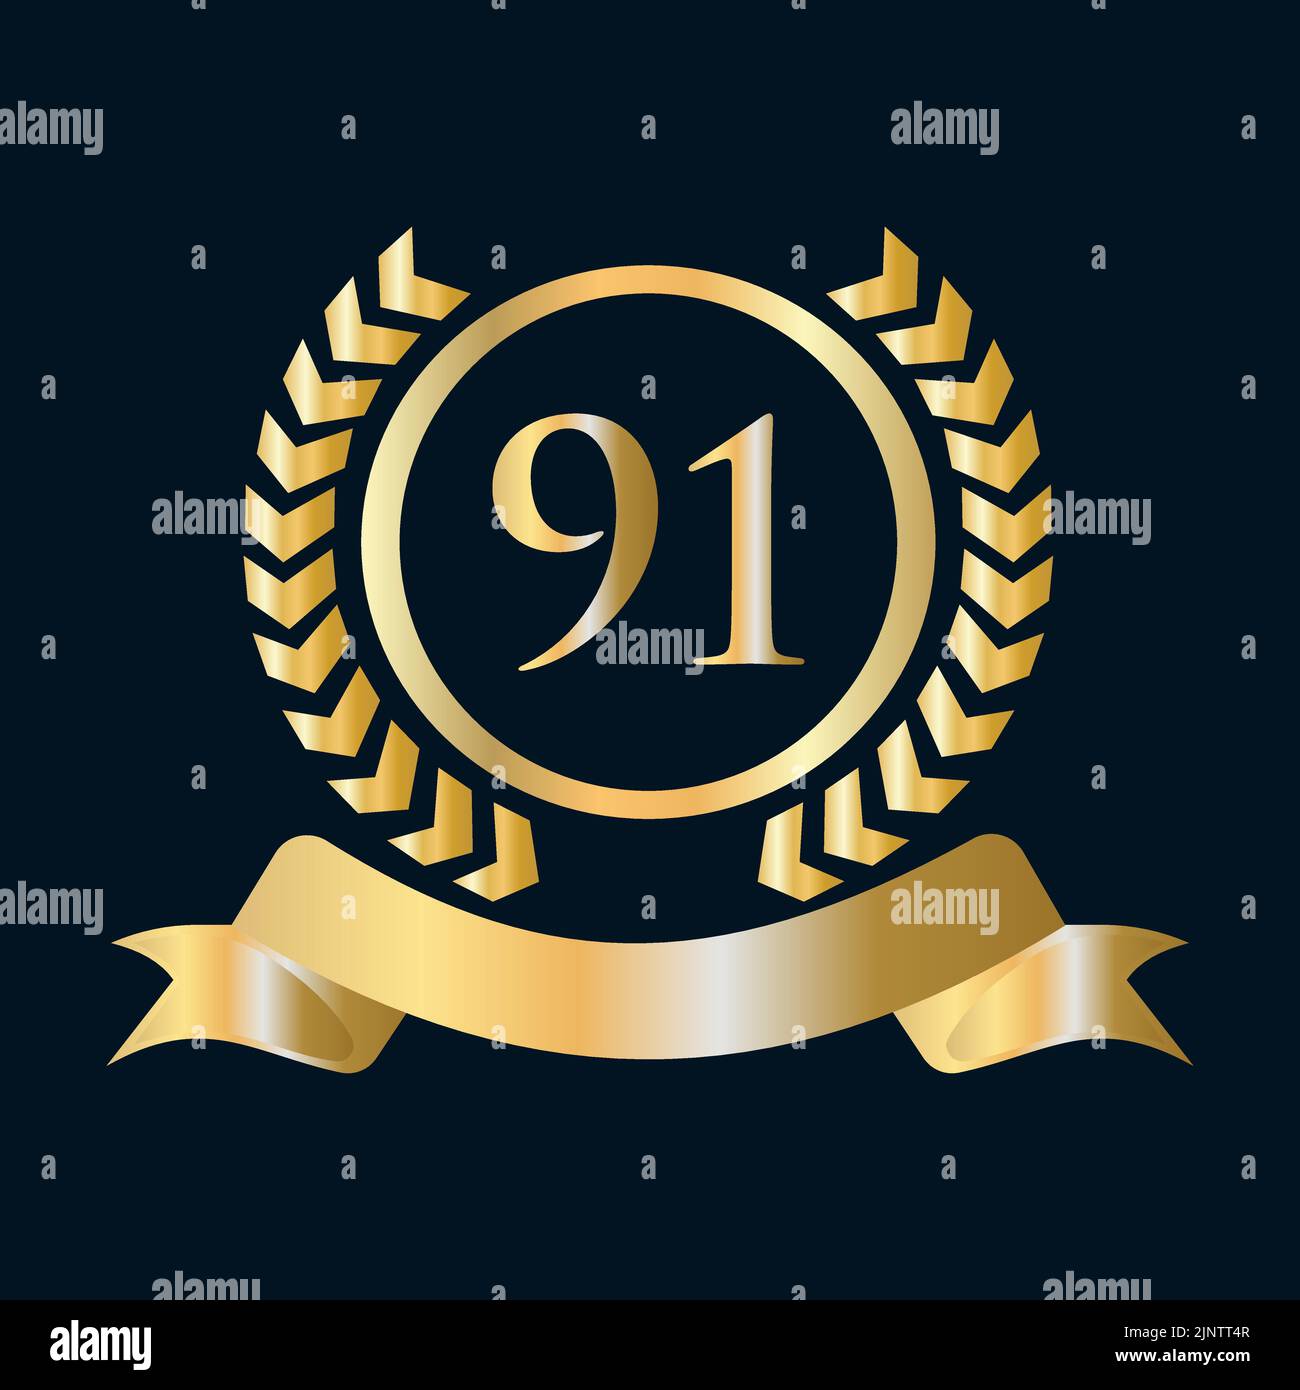 Ninety One, 91 Years Anniversary Celebration Gold and Black Template. Luxury Style Gold Heraldic Crest Logo Element Vintage Laurel Vector Stock Vector